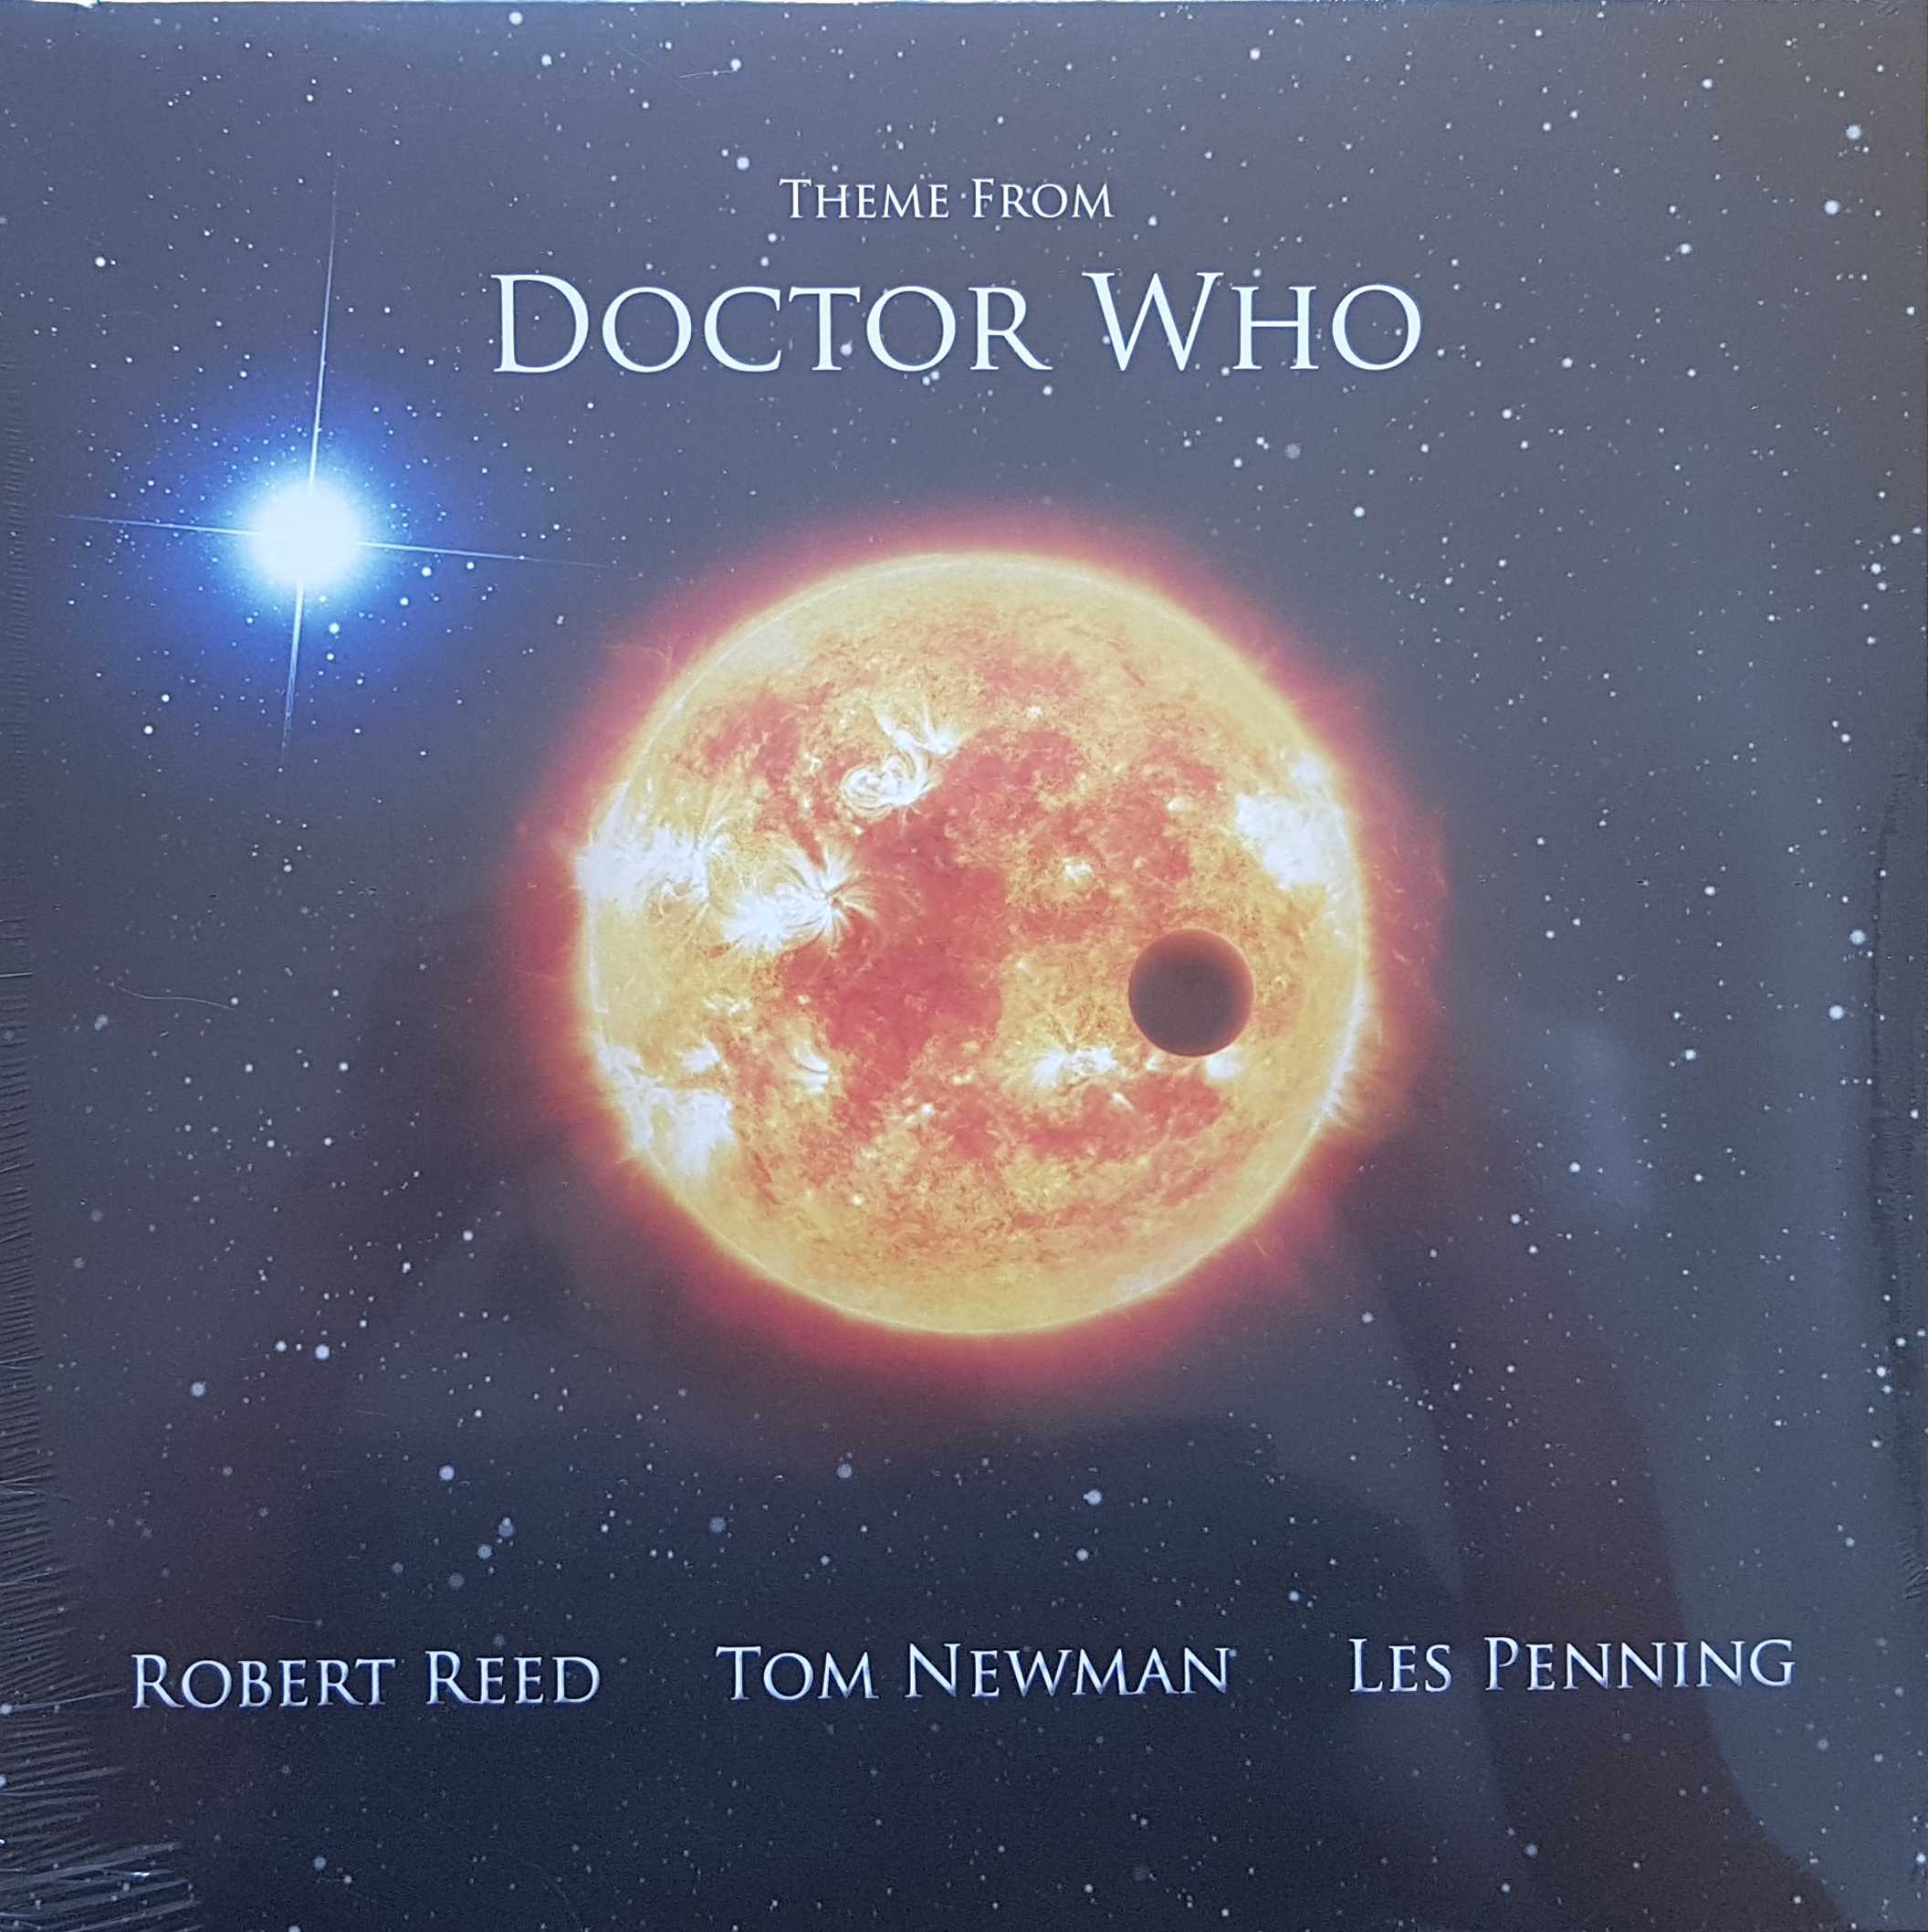 Picture of PLGS 08 Theme from Doctor Who by artist Robert Reed / Tom Newman / Les Penning / Ron Grainer from the BBC 12inches - Records and Tapes library